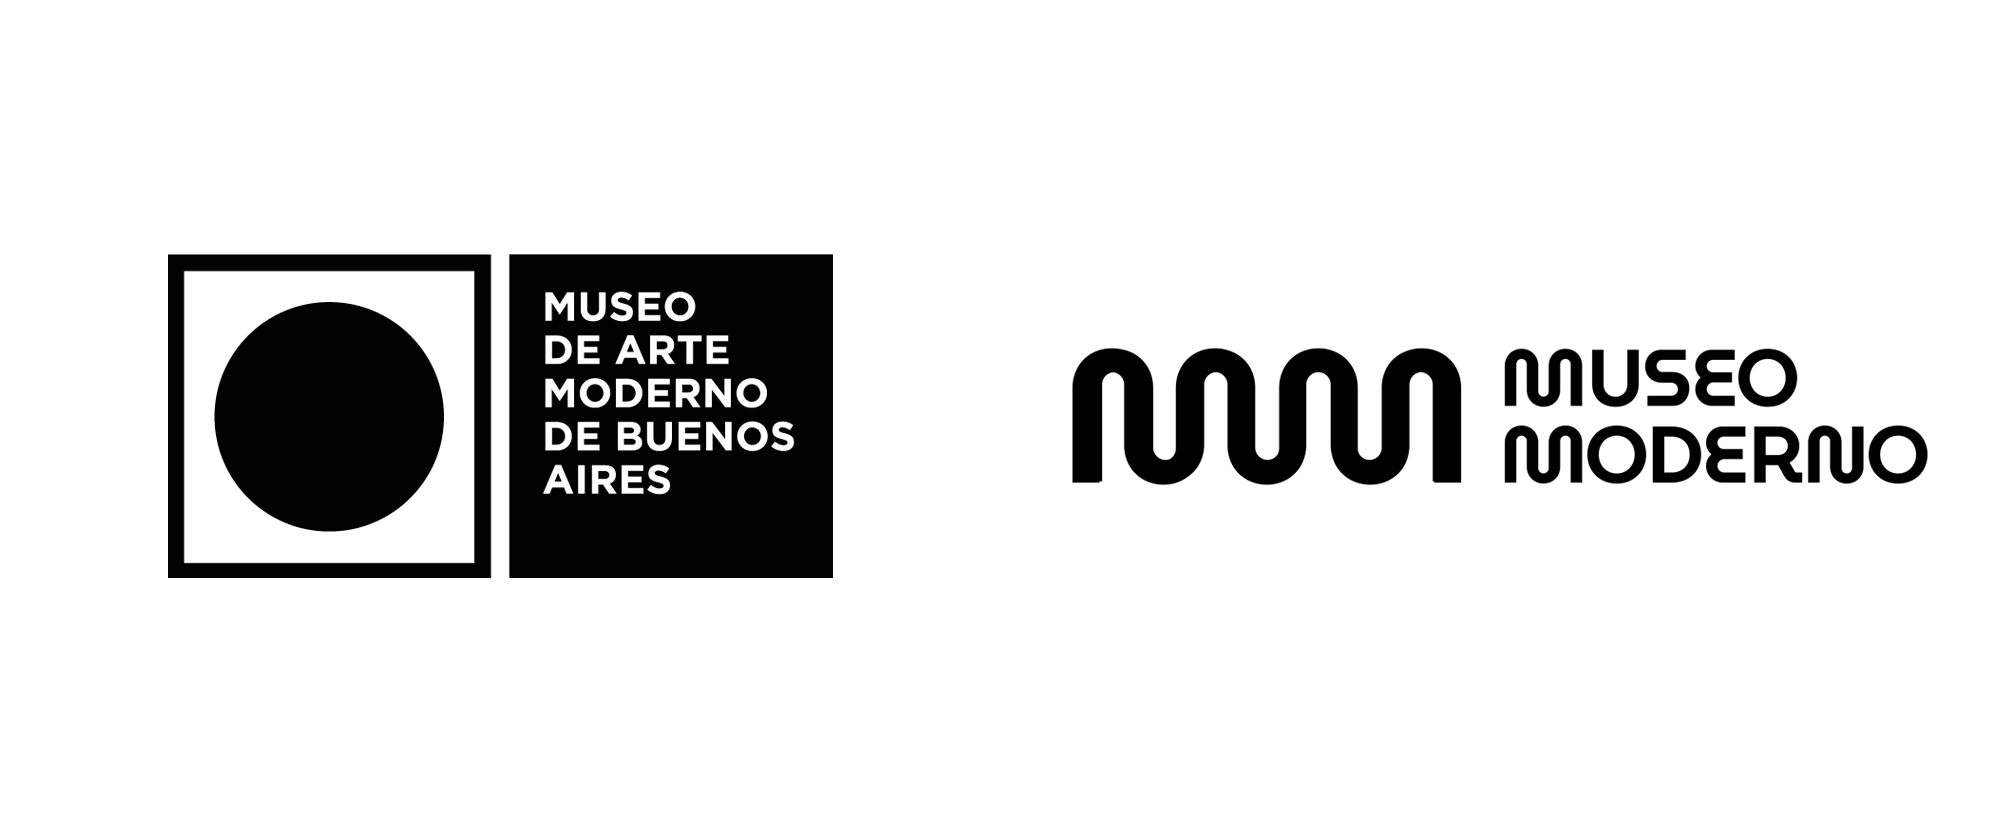 New Logo and Identity for Museo Moderno by Estudio Garricho and Omnibus-Type